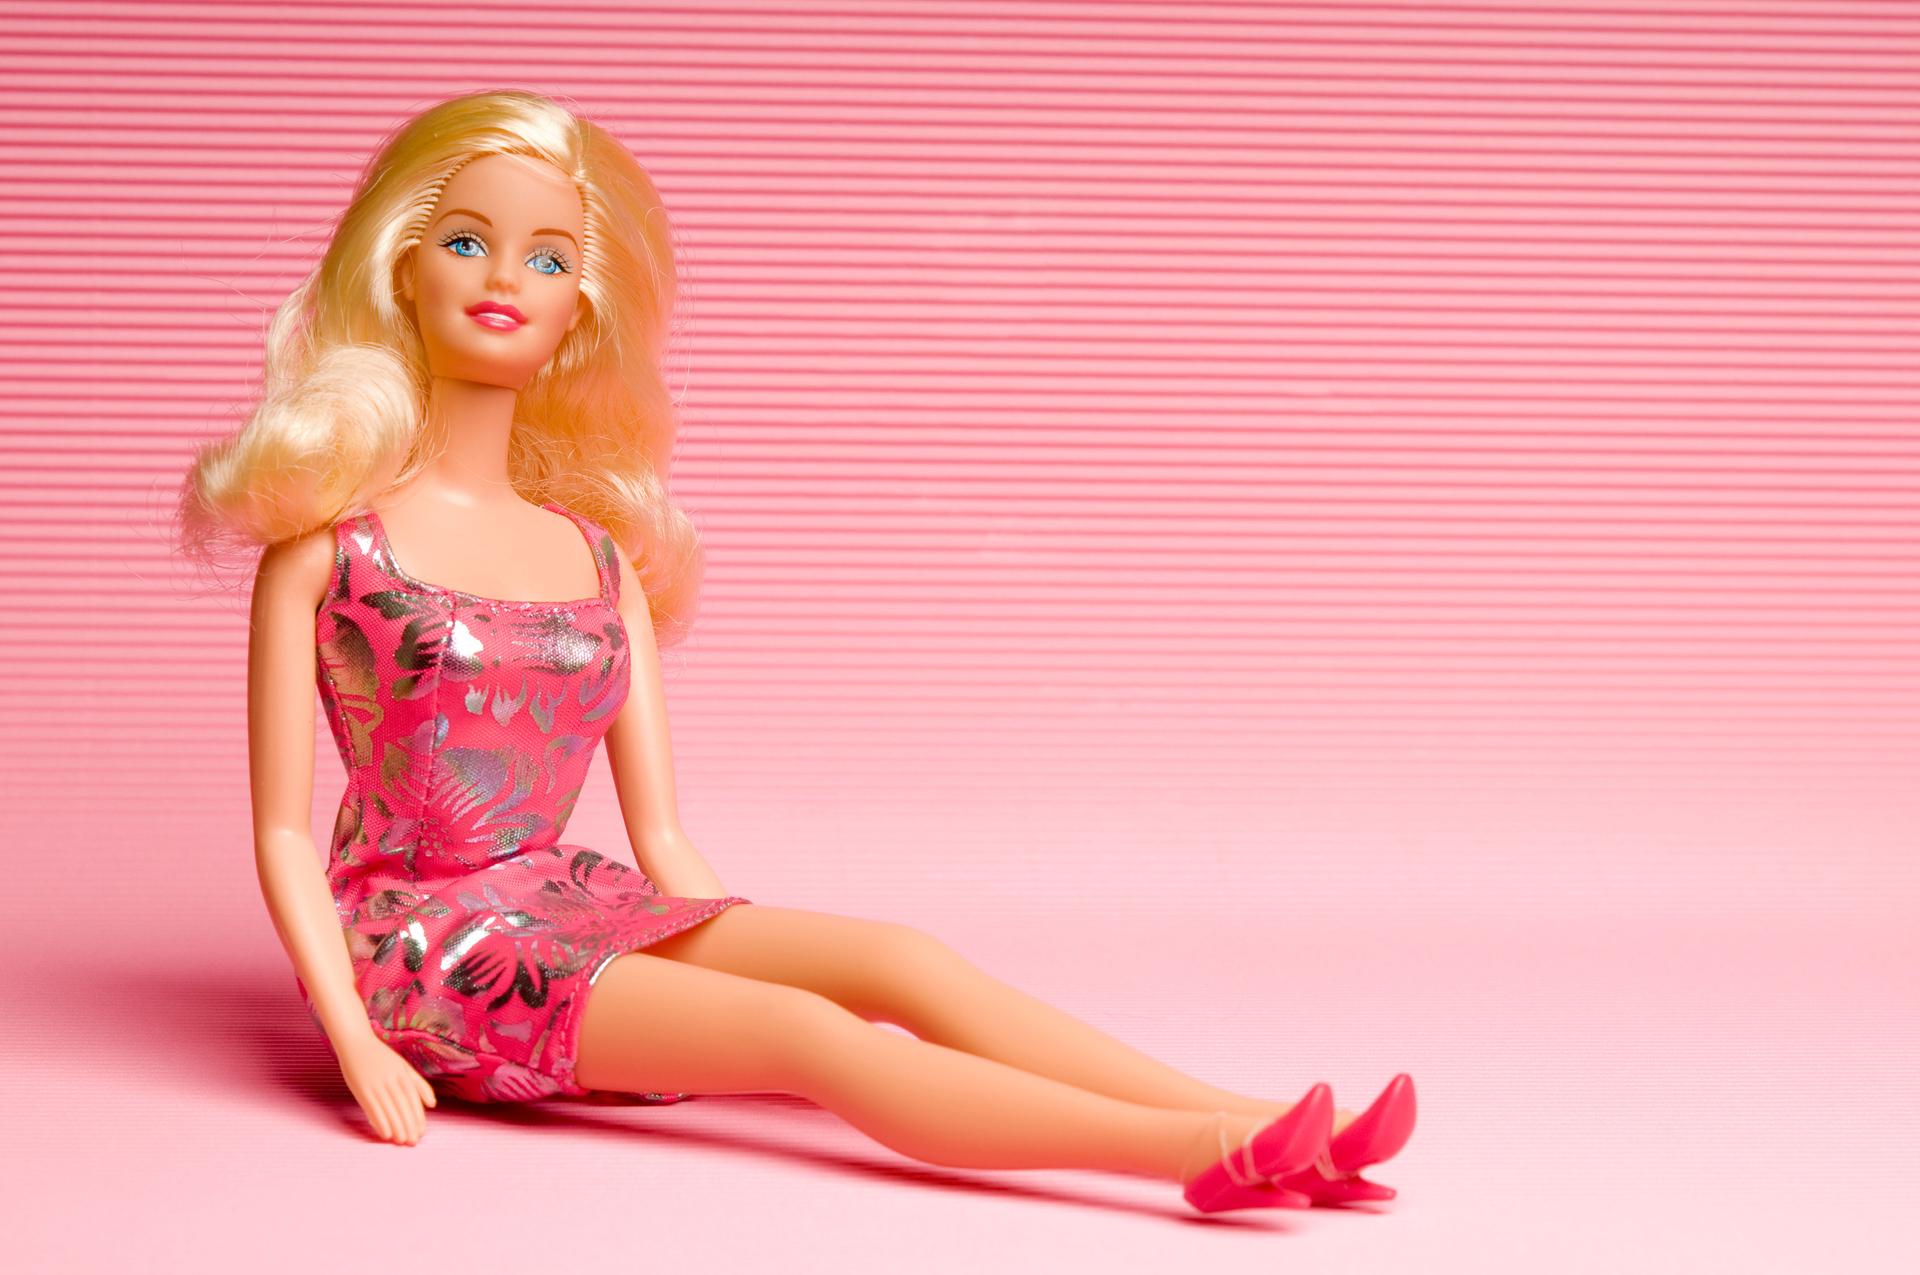 A posed Barbie doll.